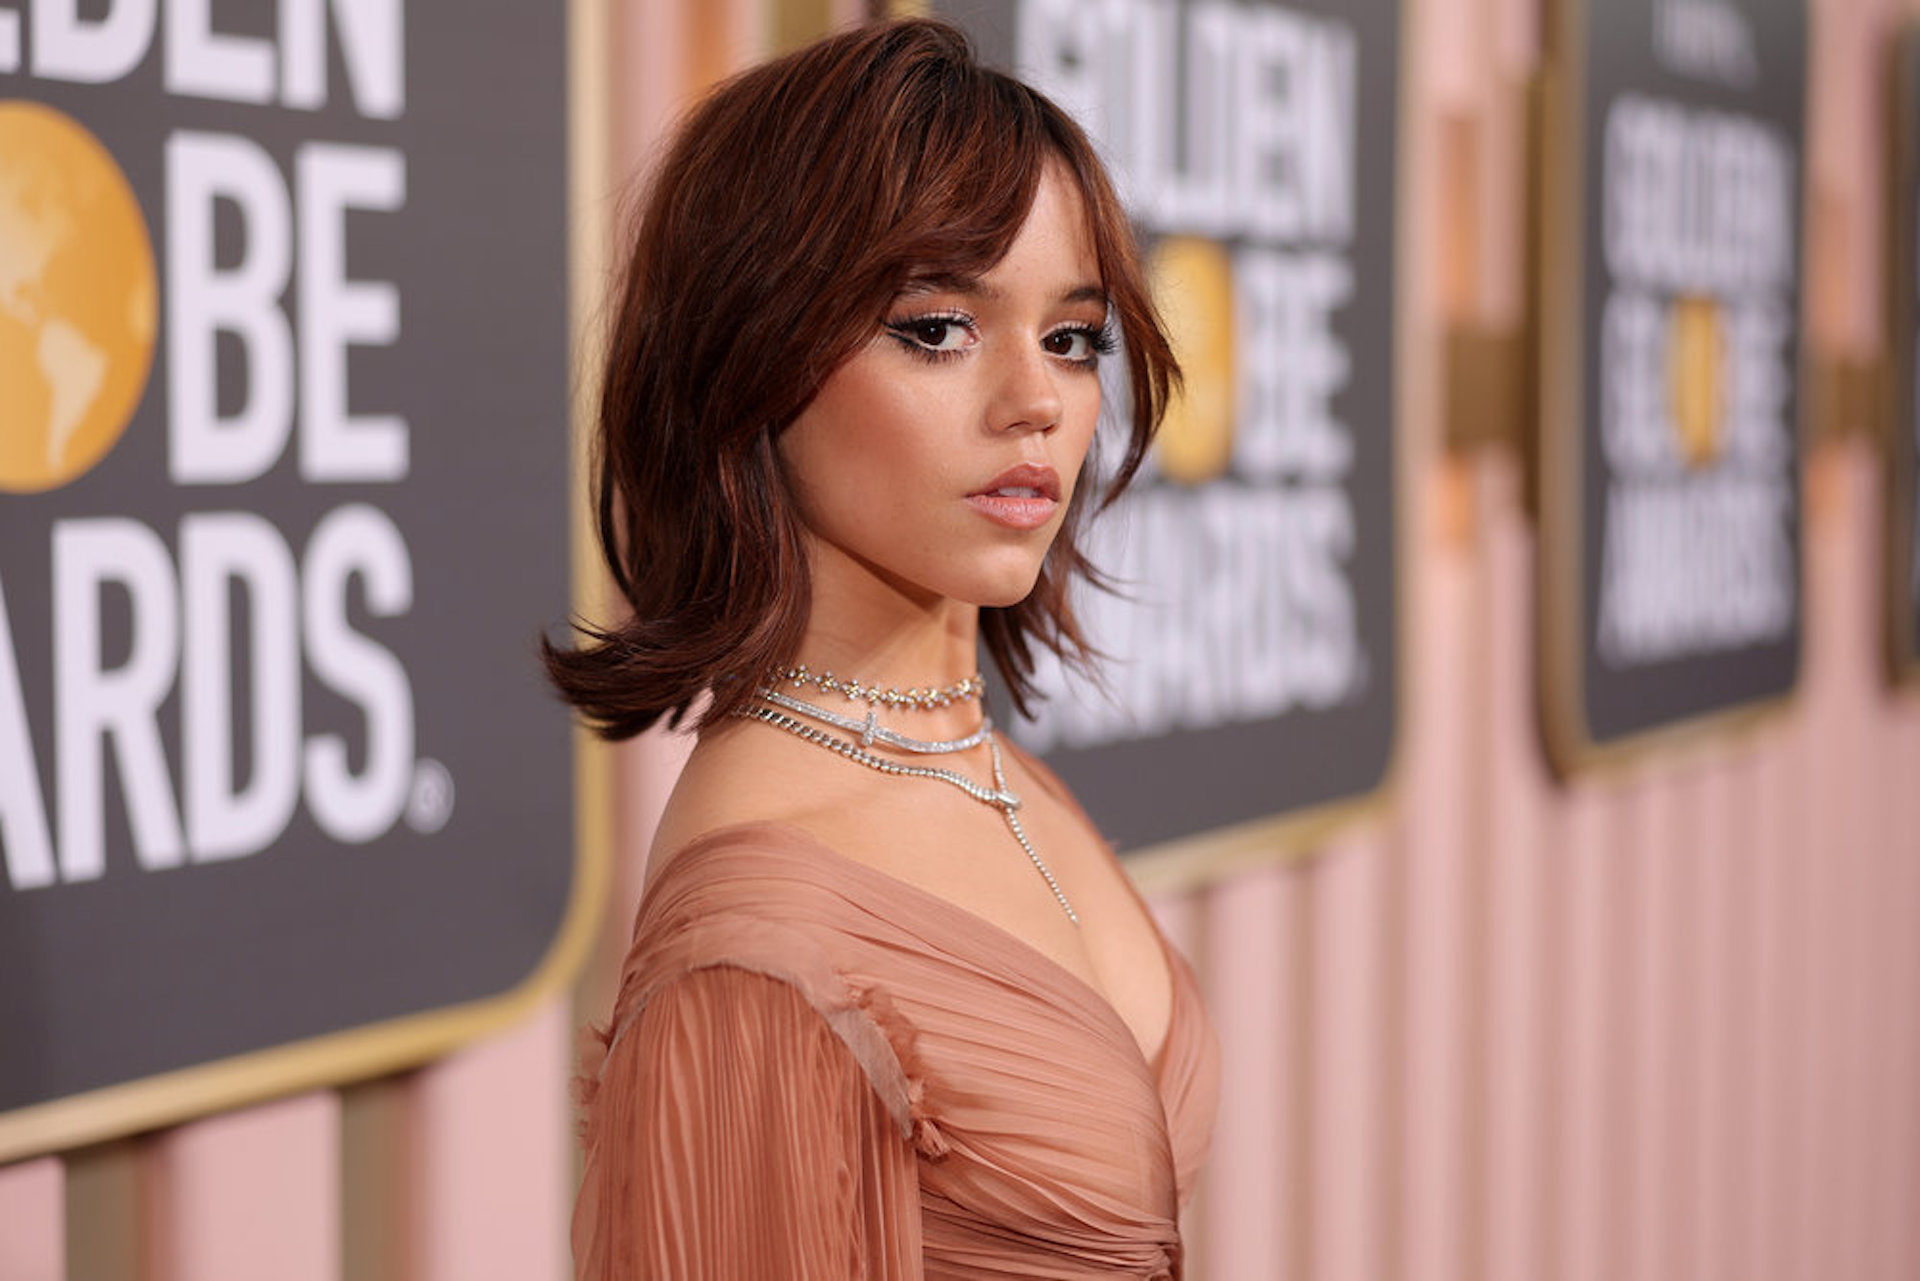 Starring in the Netflix hit series, Jenna Ortega says she is stunned by 'Wednesday's success at the Golden Globe Awards (and she looks stunning doing it).